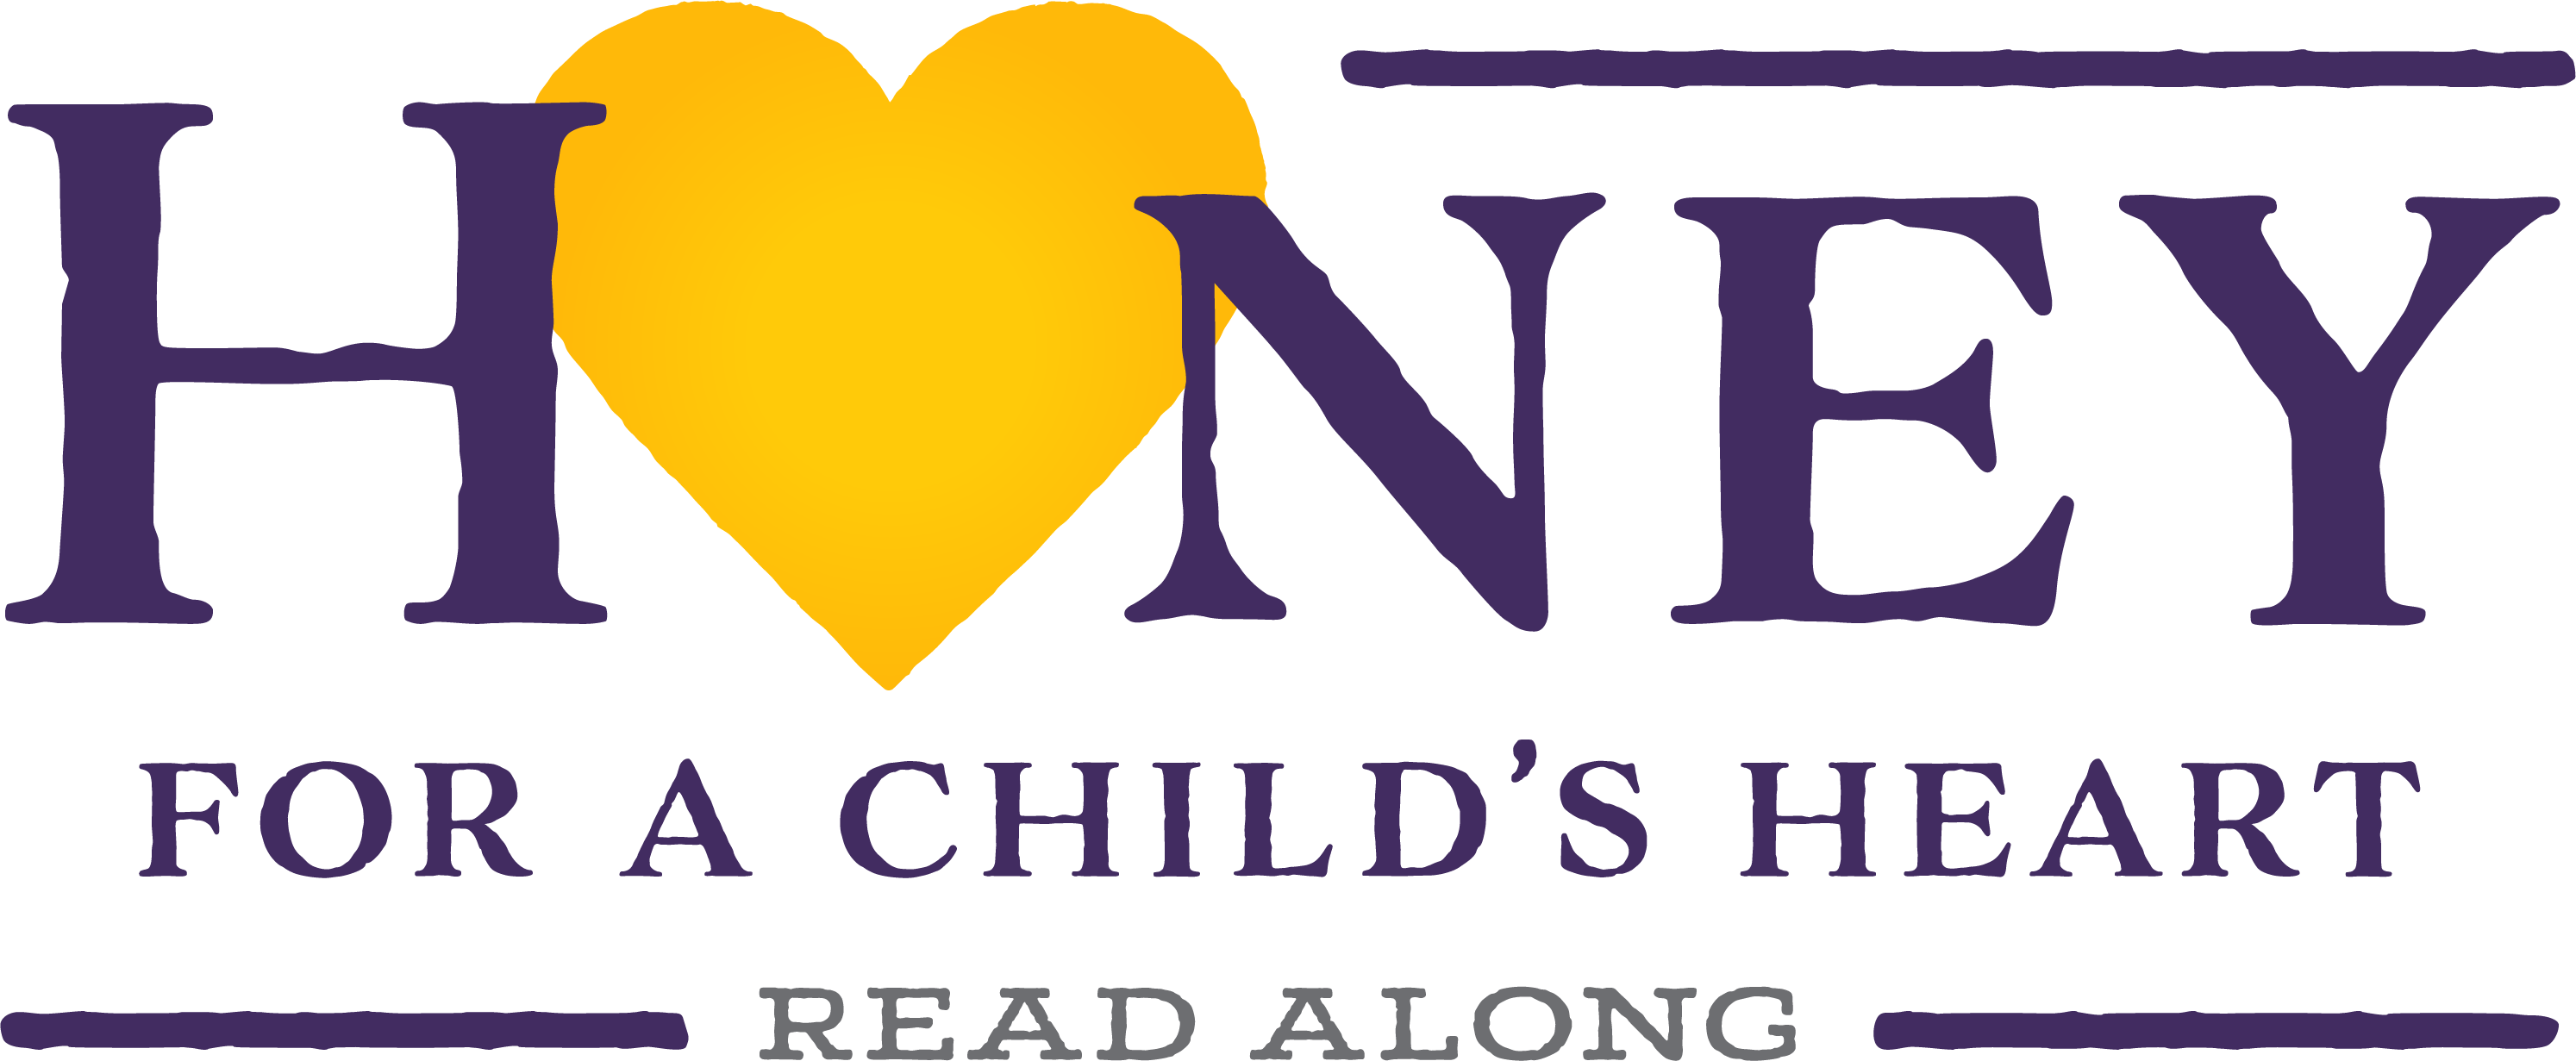 honey for a child's heart read along